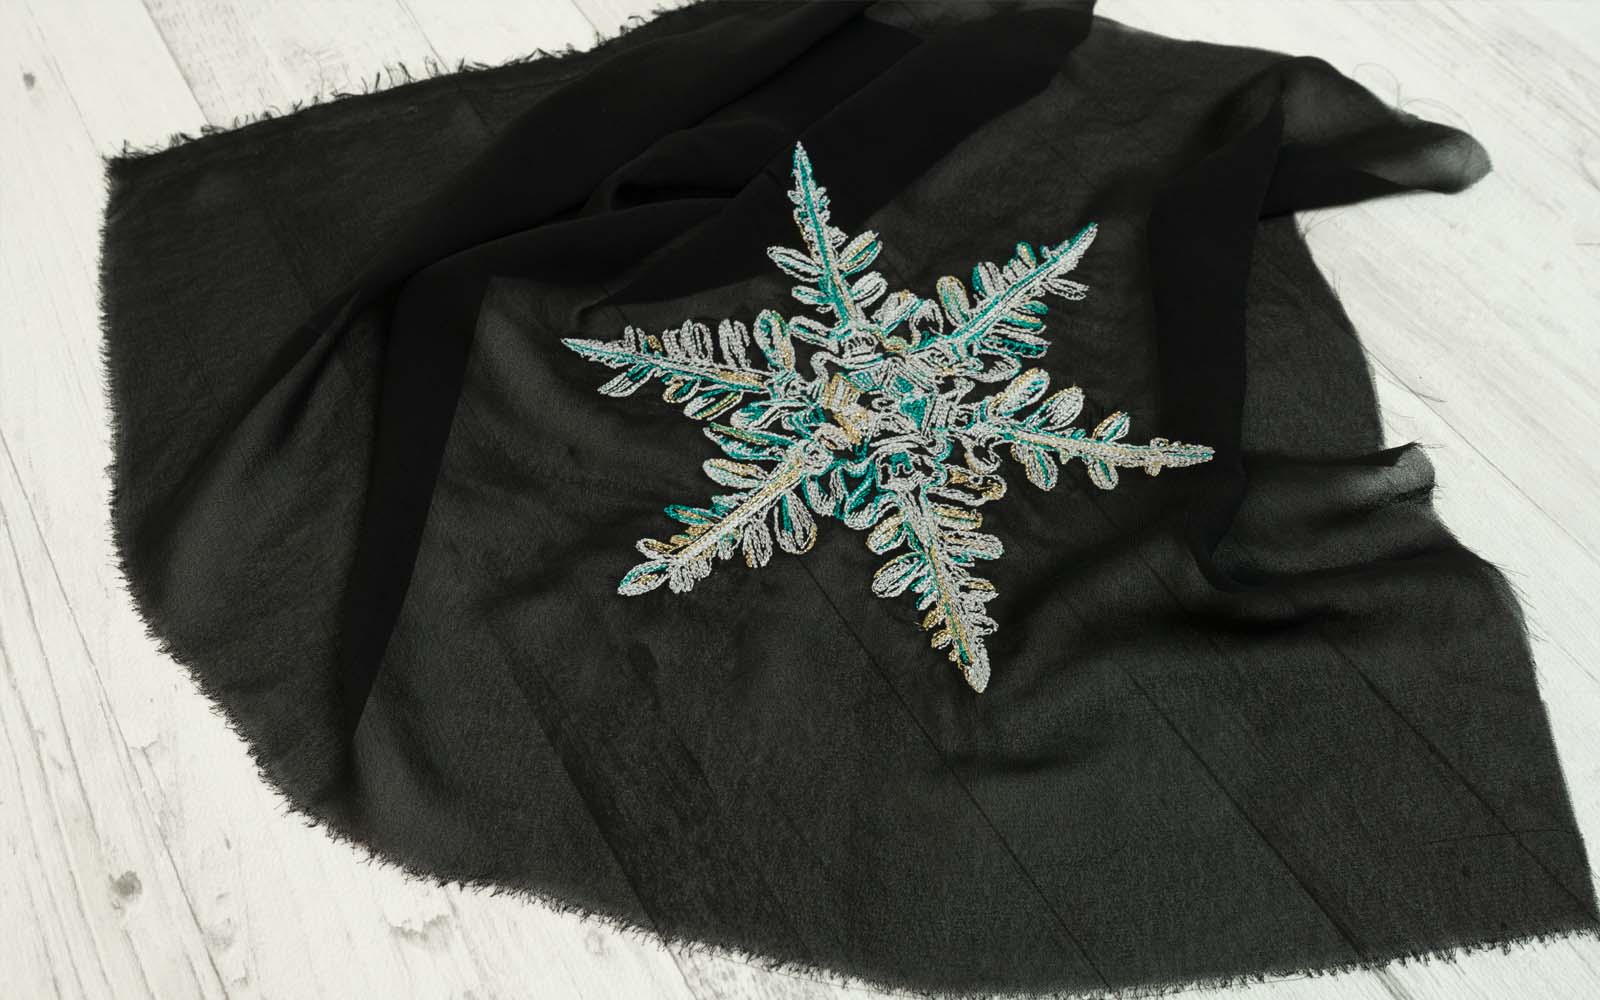 Embroidered star on black fabric